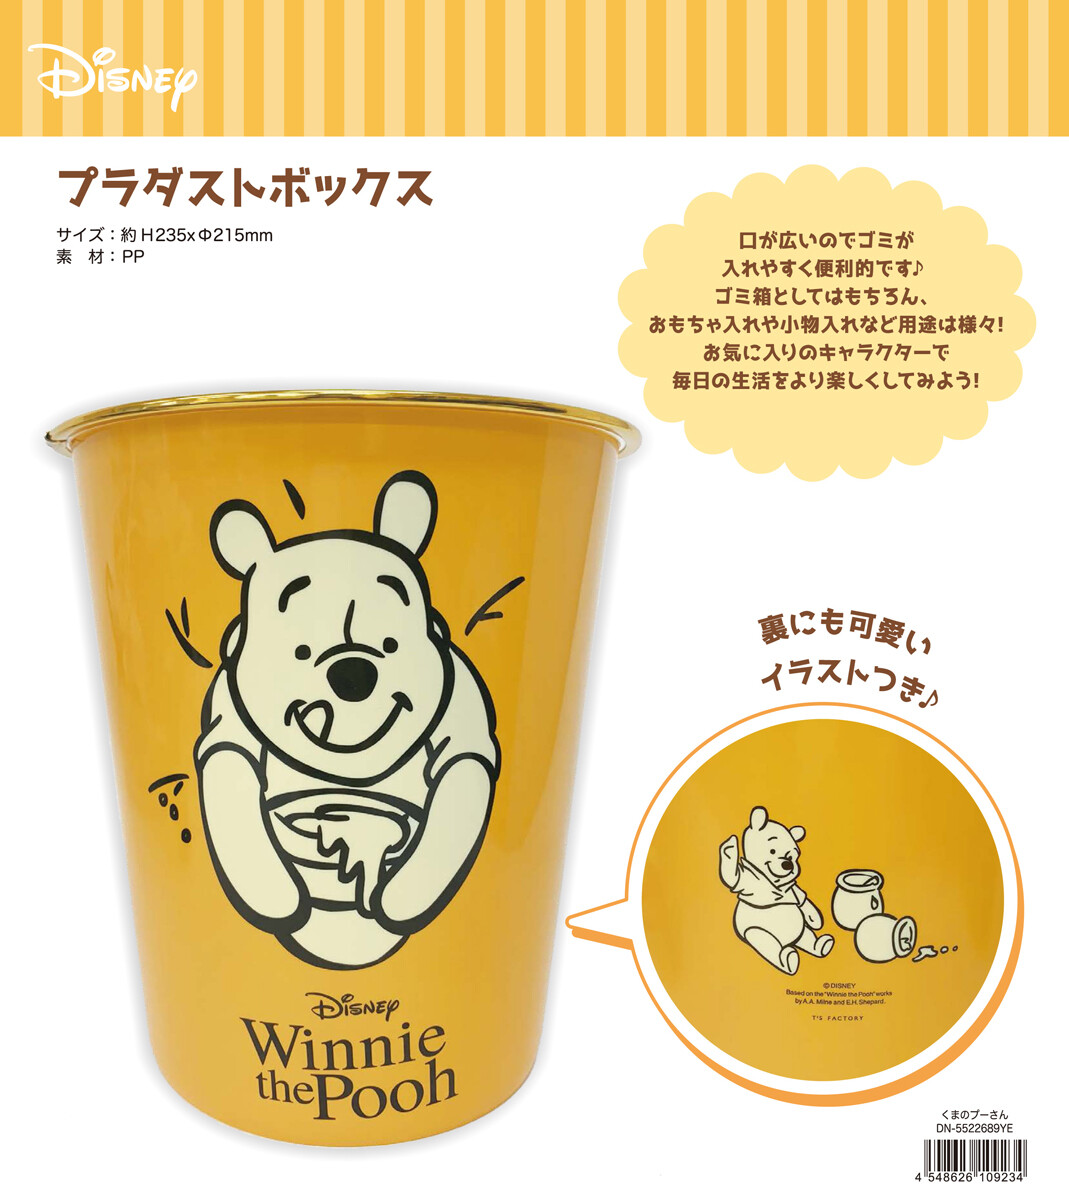 Disney Dust Box Winnie The Pooh Import Japanese Products At Wholesale Prices Super Delivery